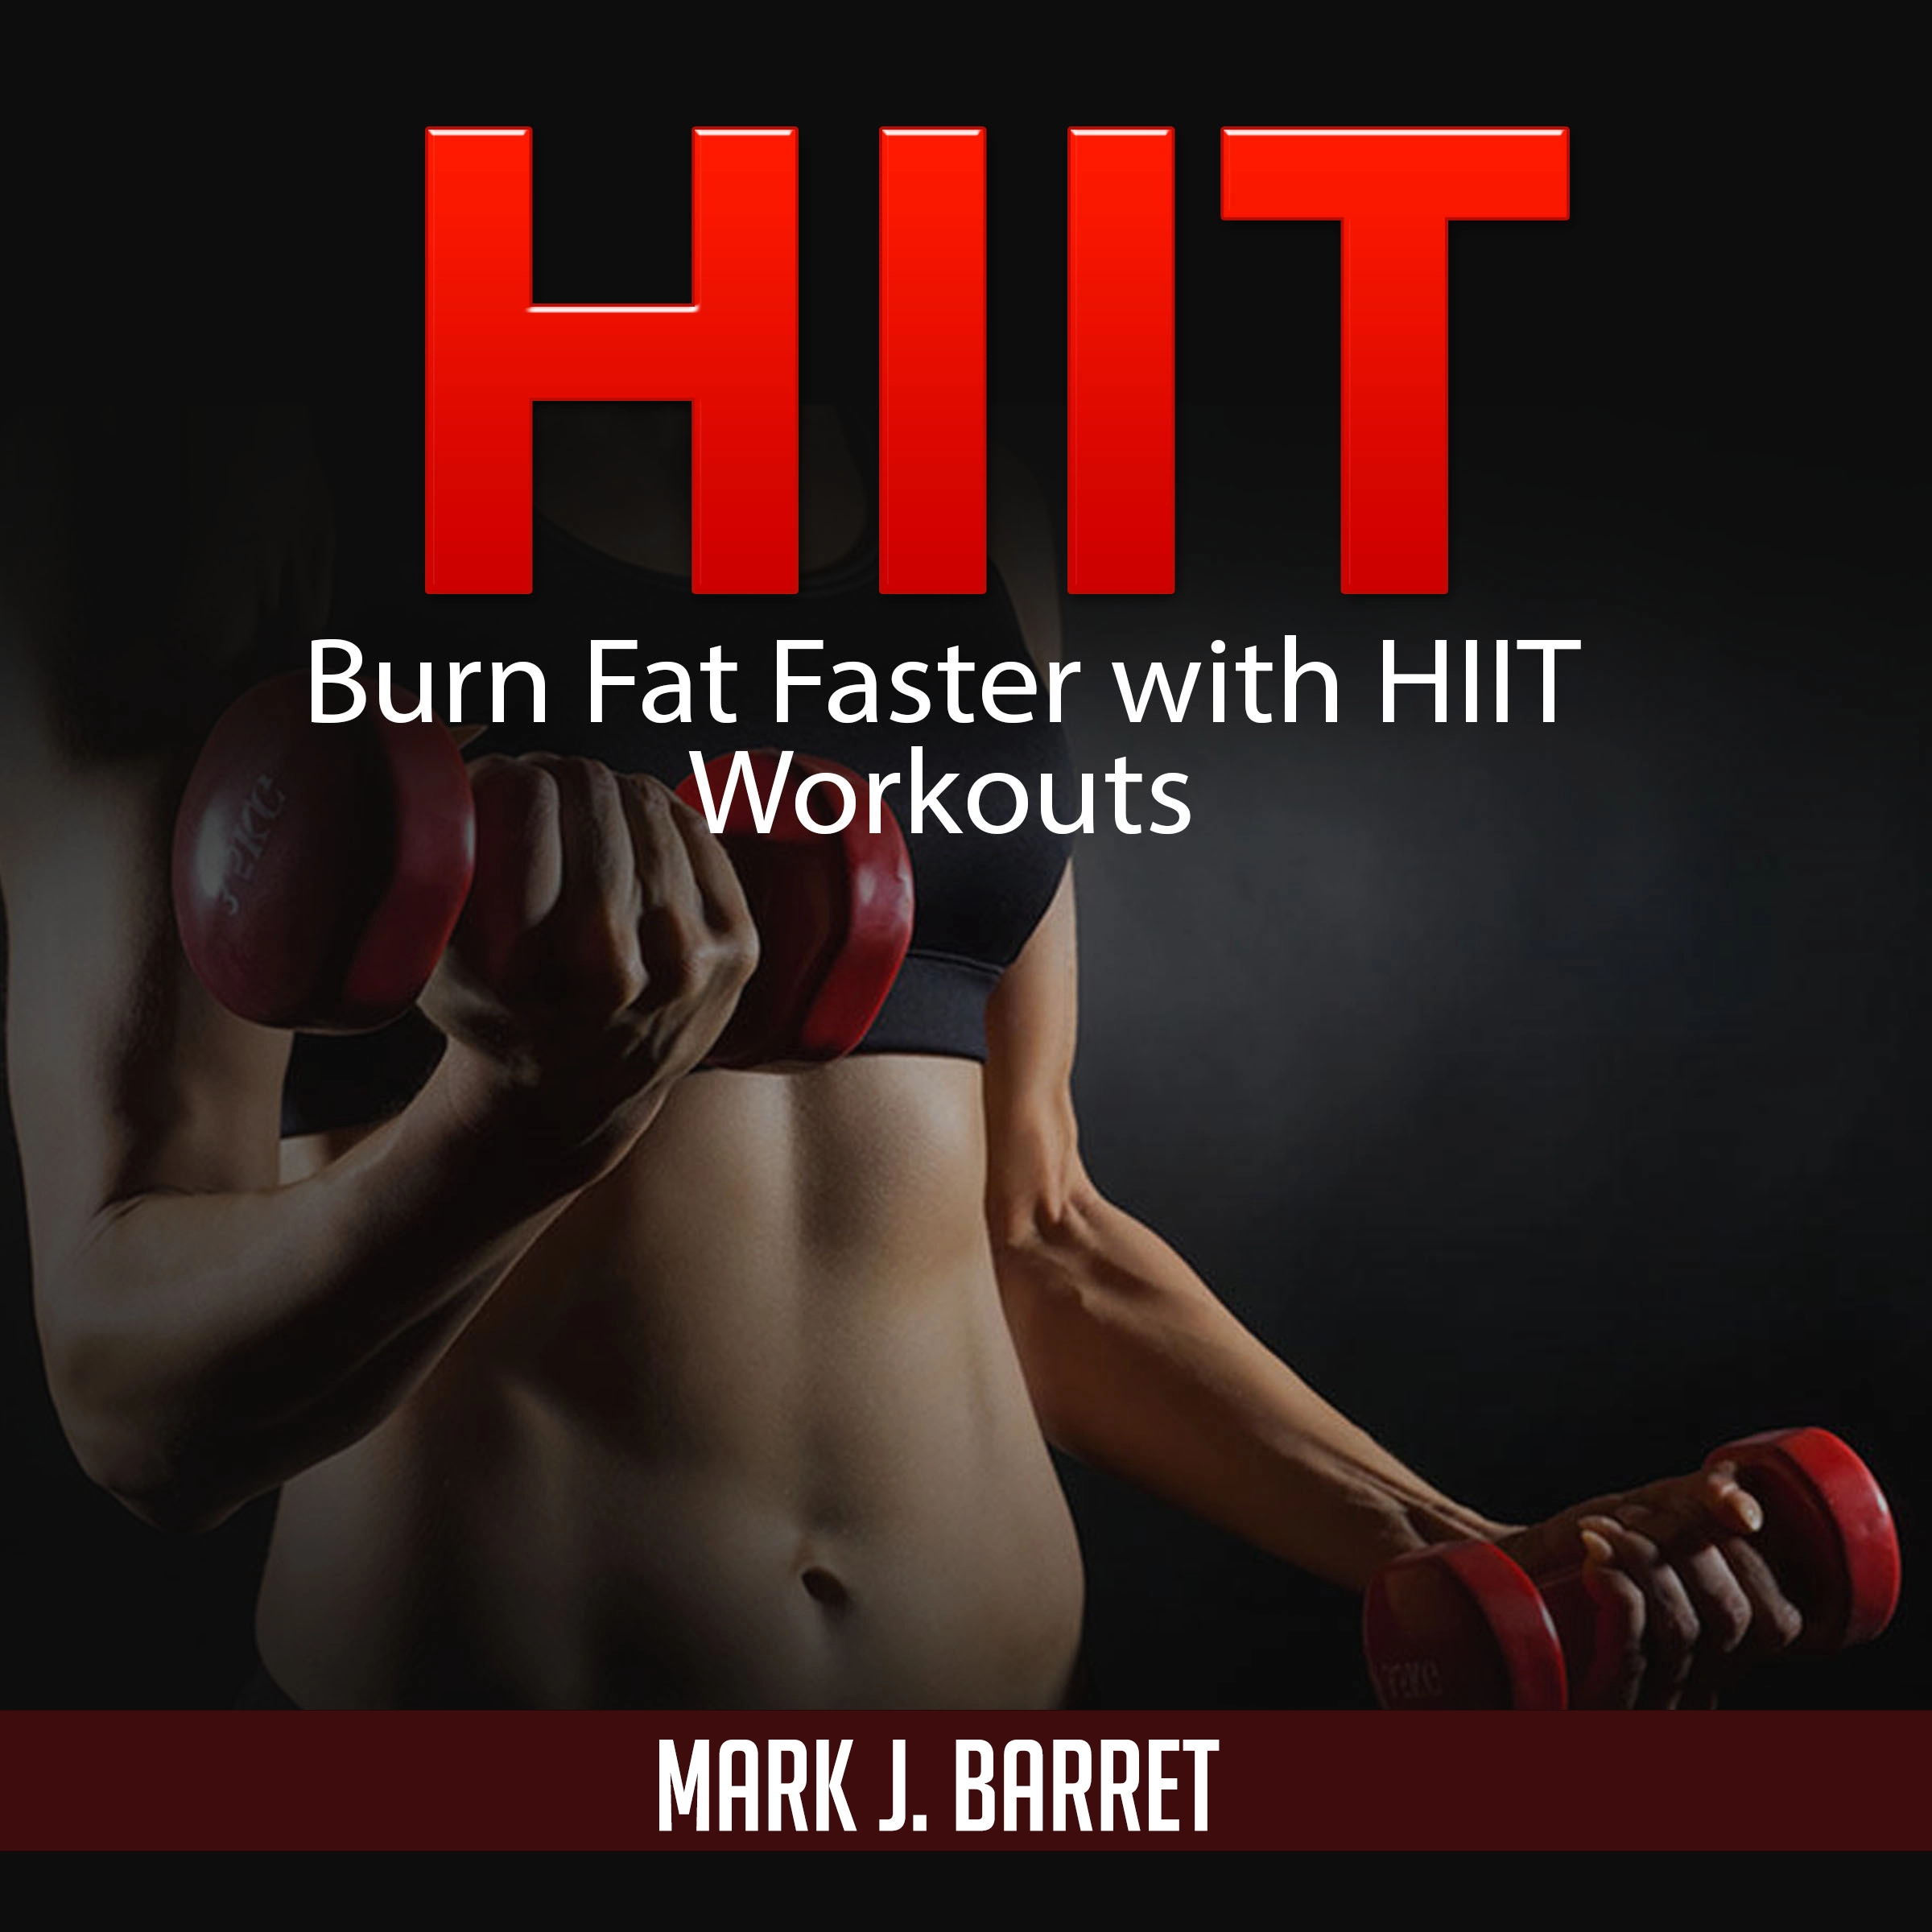 Hiit: Burn Fat Faster with HIIT Workouts by Mark J. Barret Audiobook